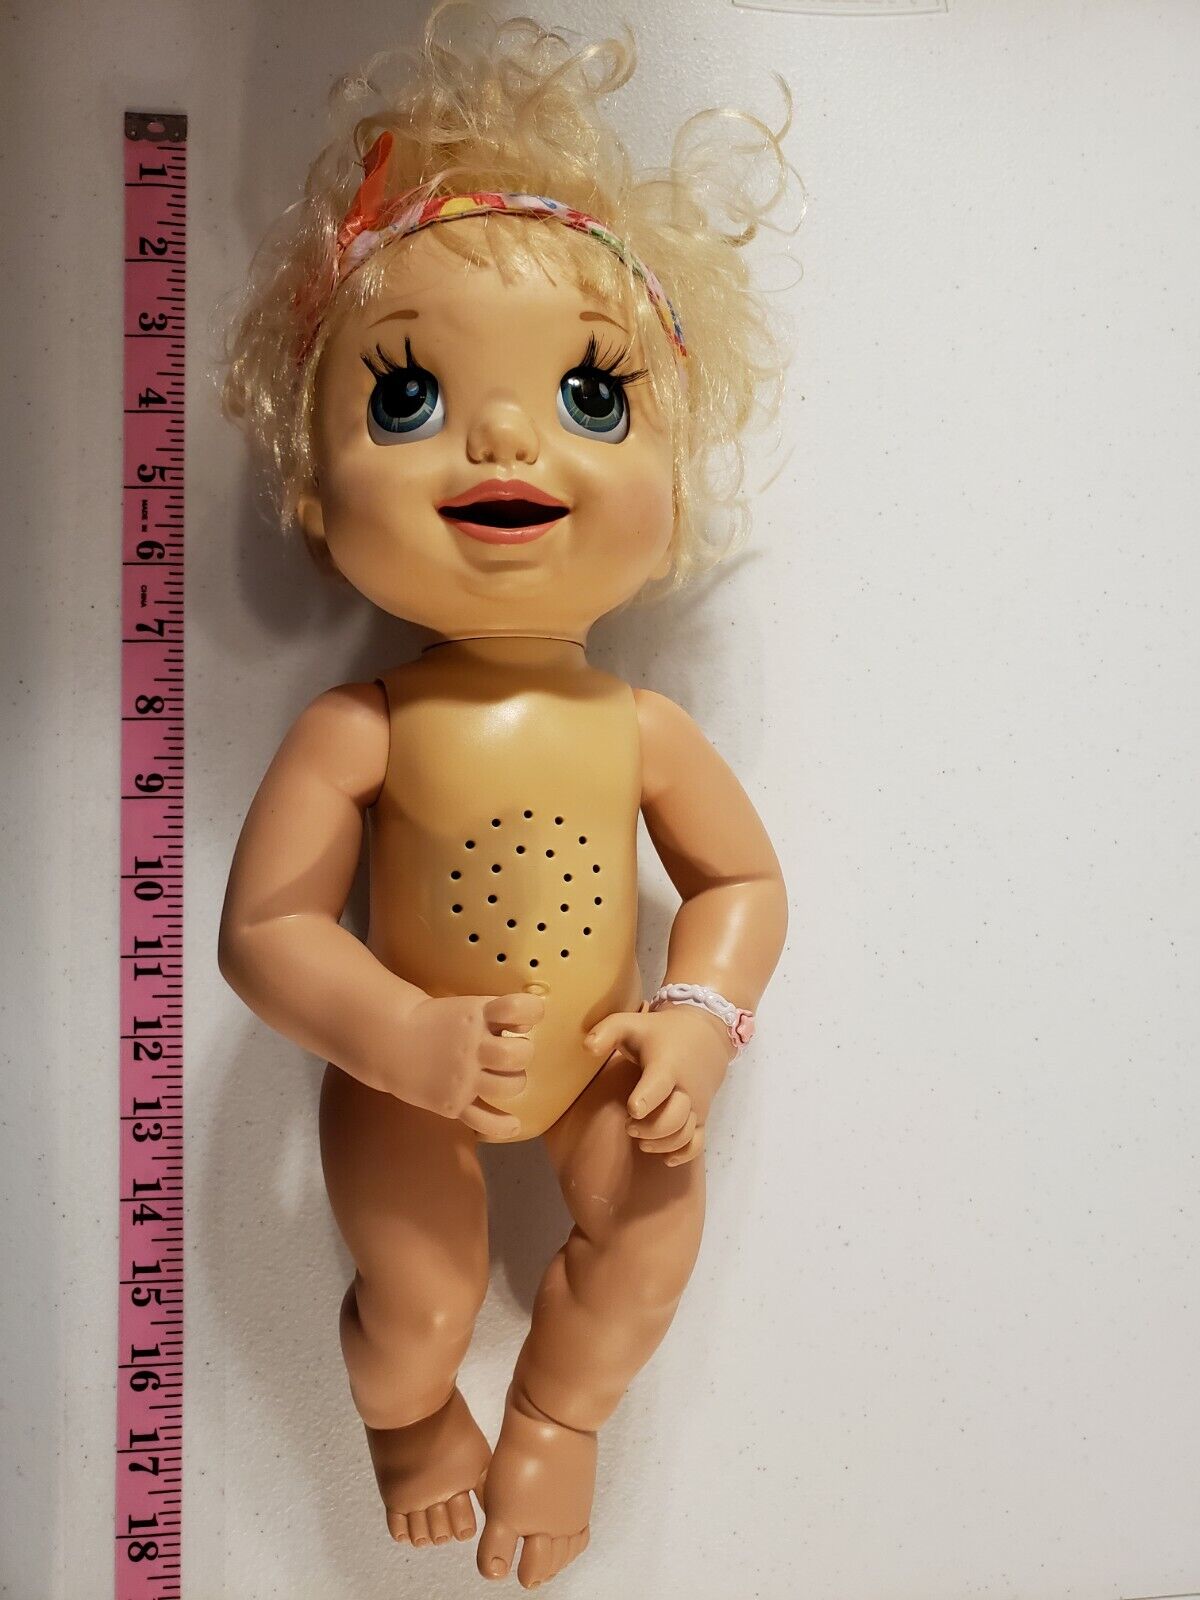 Vintage Baby Alive Learn To Baby Doll Spoon Tested Working | eBay